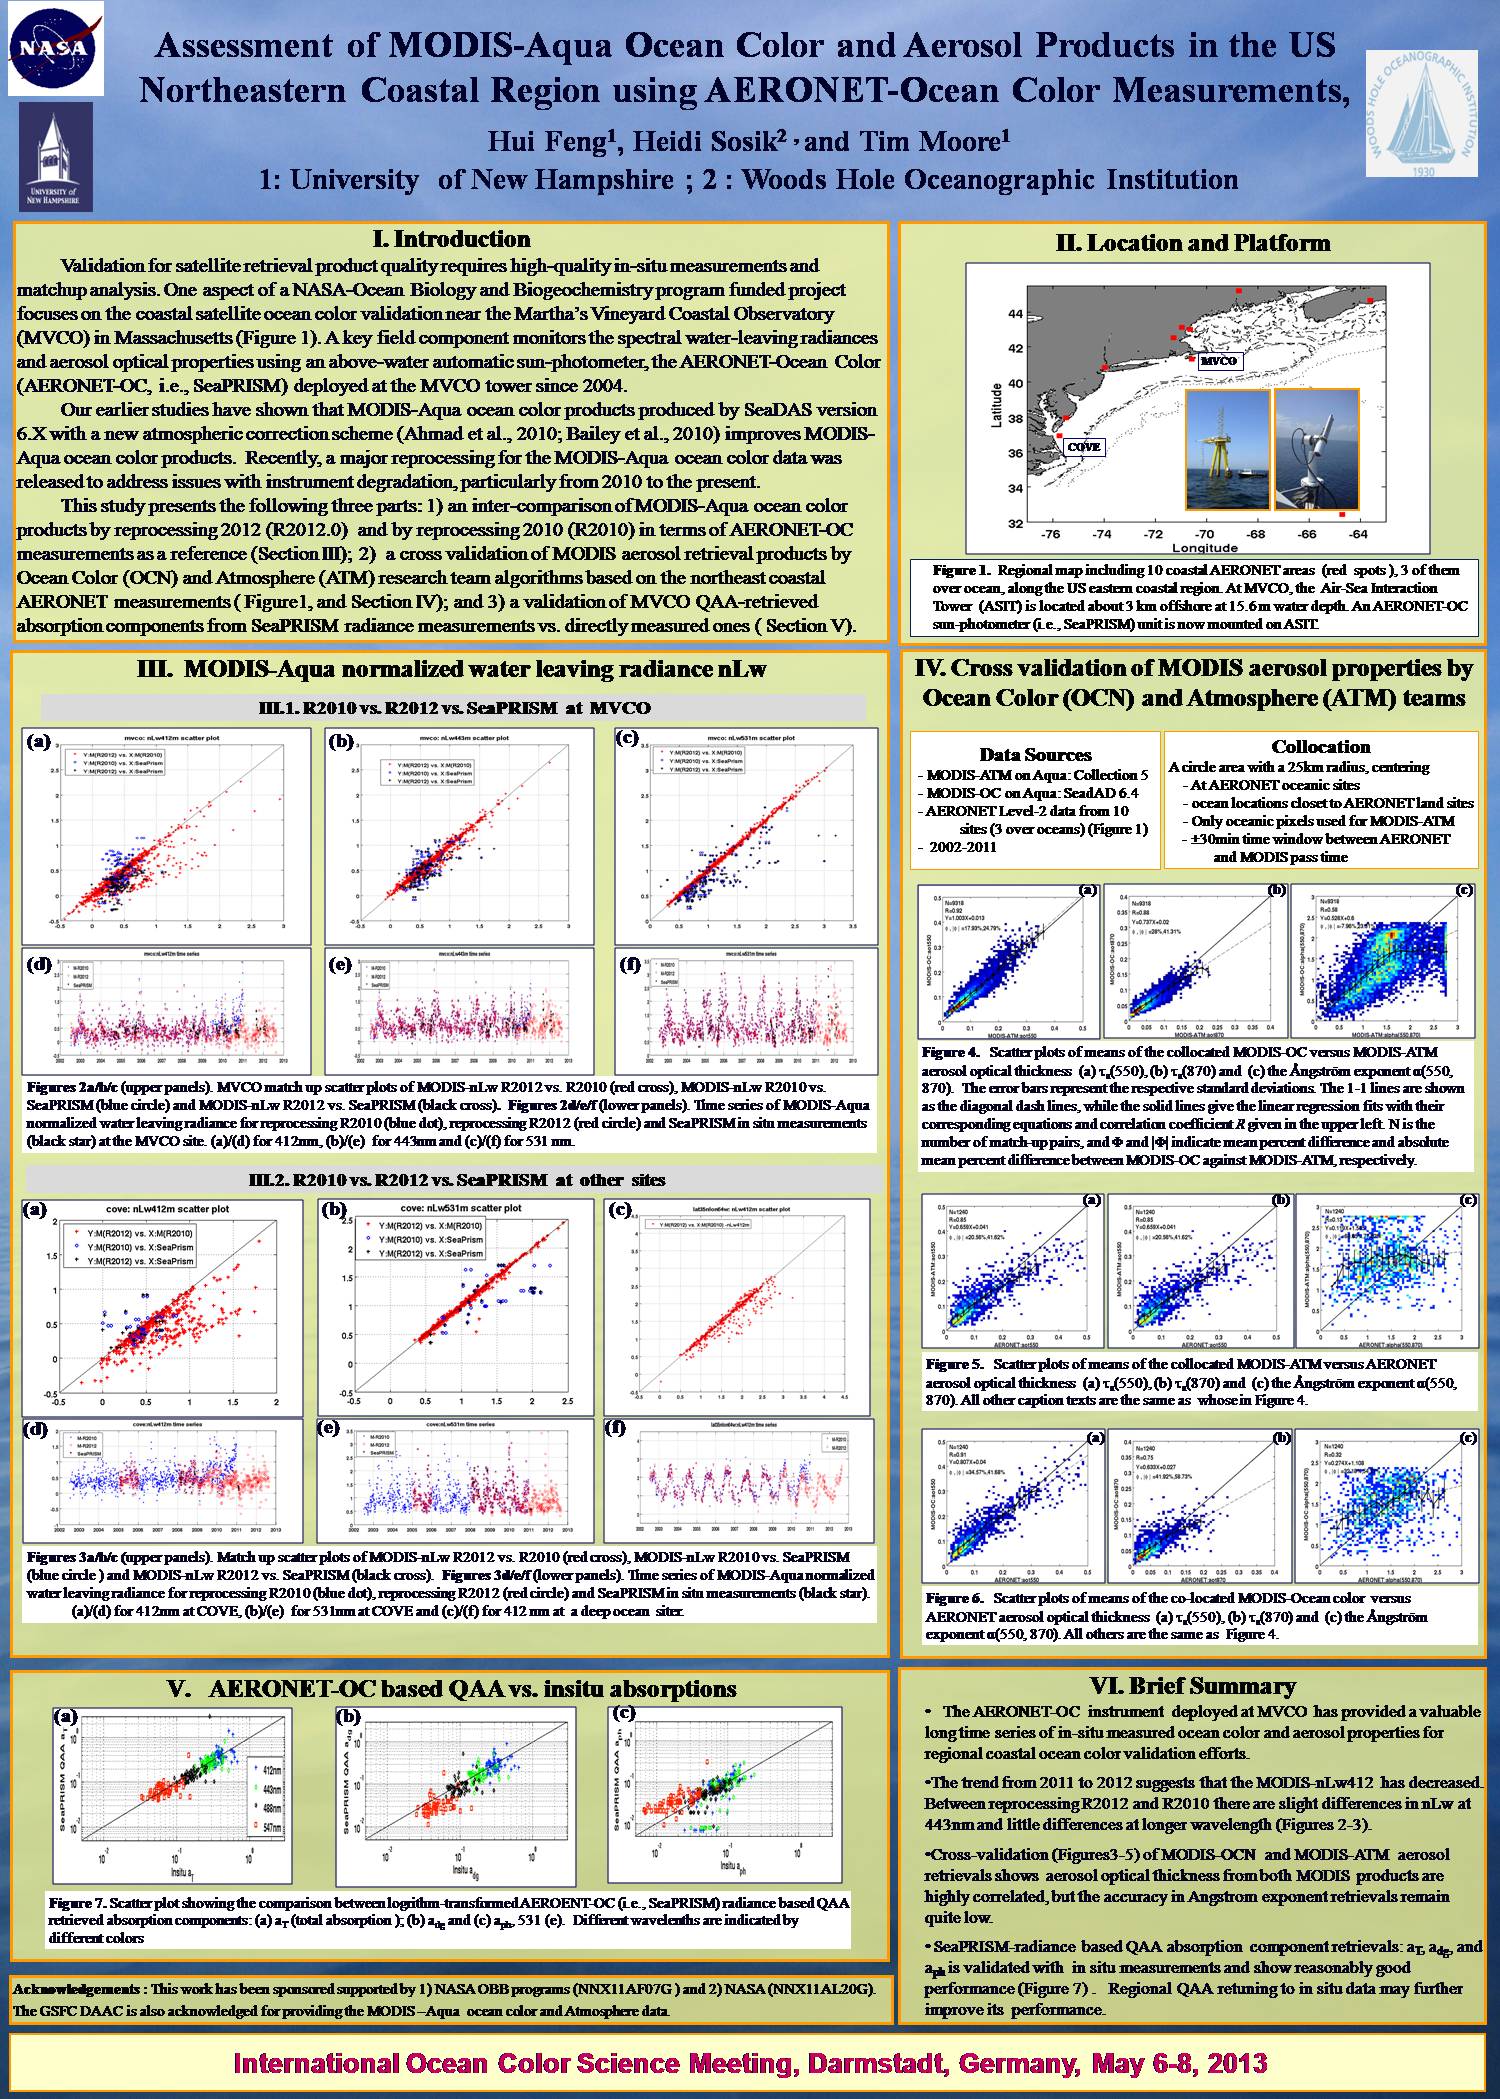 Assessment Of Modis-Aqua Ocean Color And Aerosol Prodcuts In The Us Northeastern Coastal Region Using Aeronet Measurements by hfengg